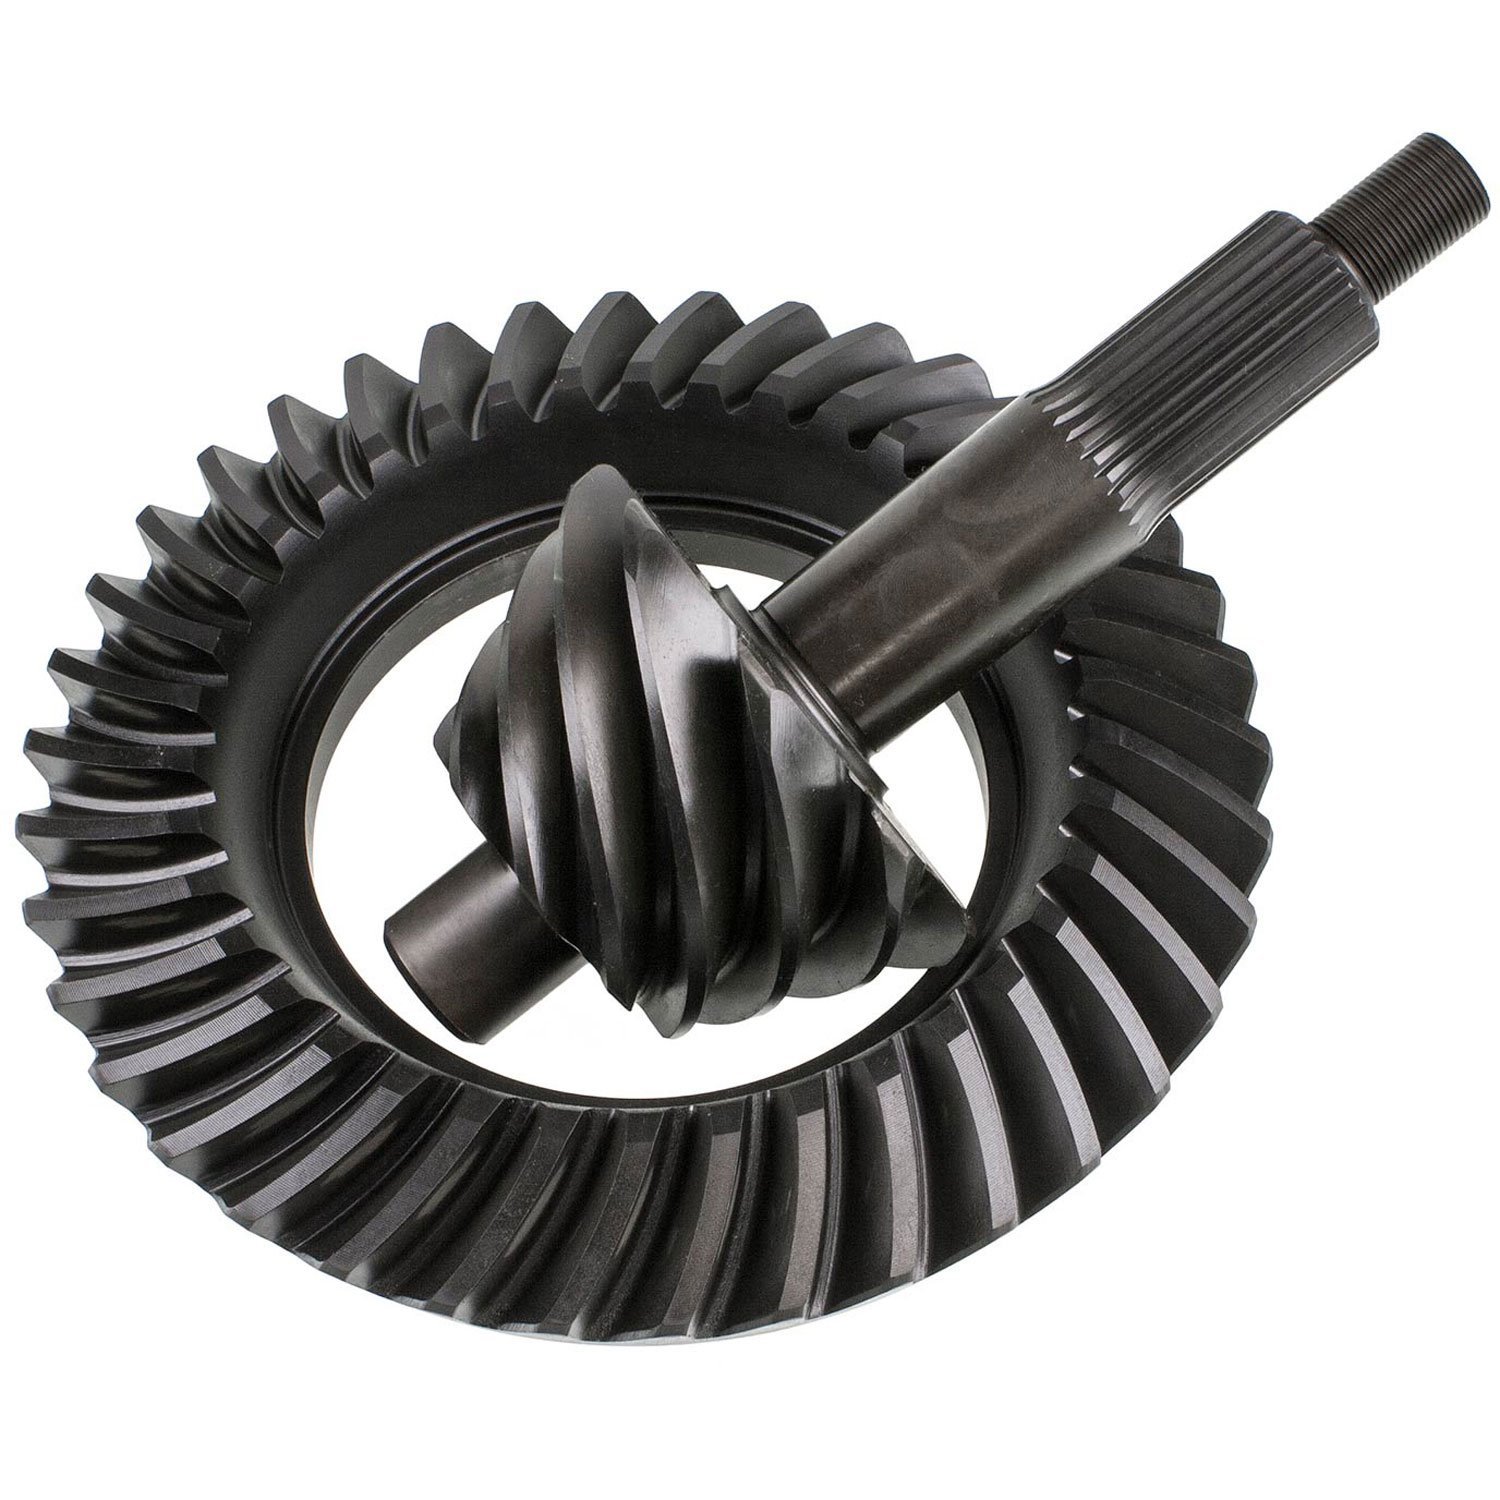 Ford Ring & Pinion Gear Set Ratio: 4.22